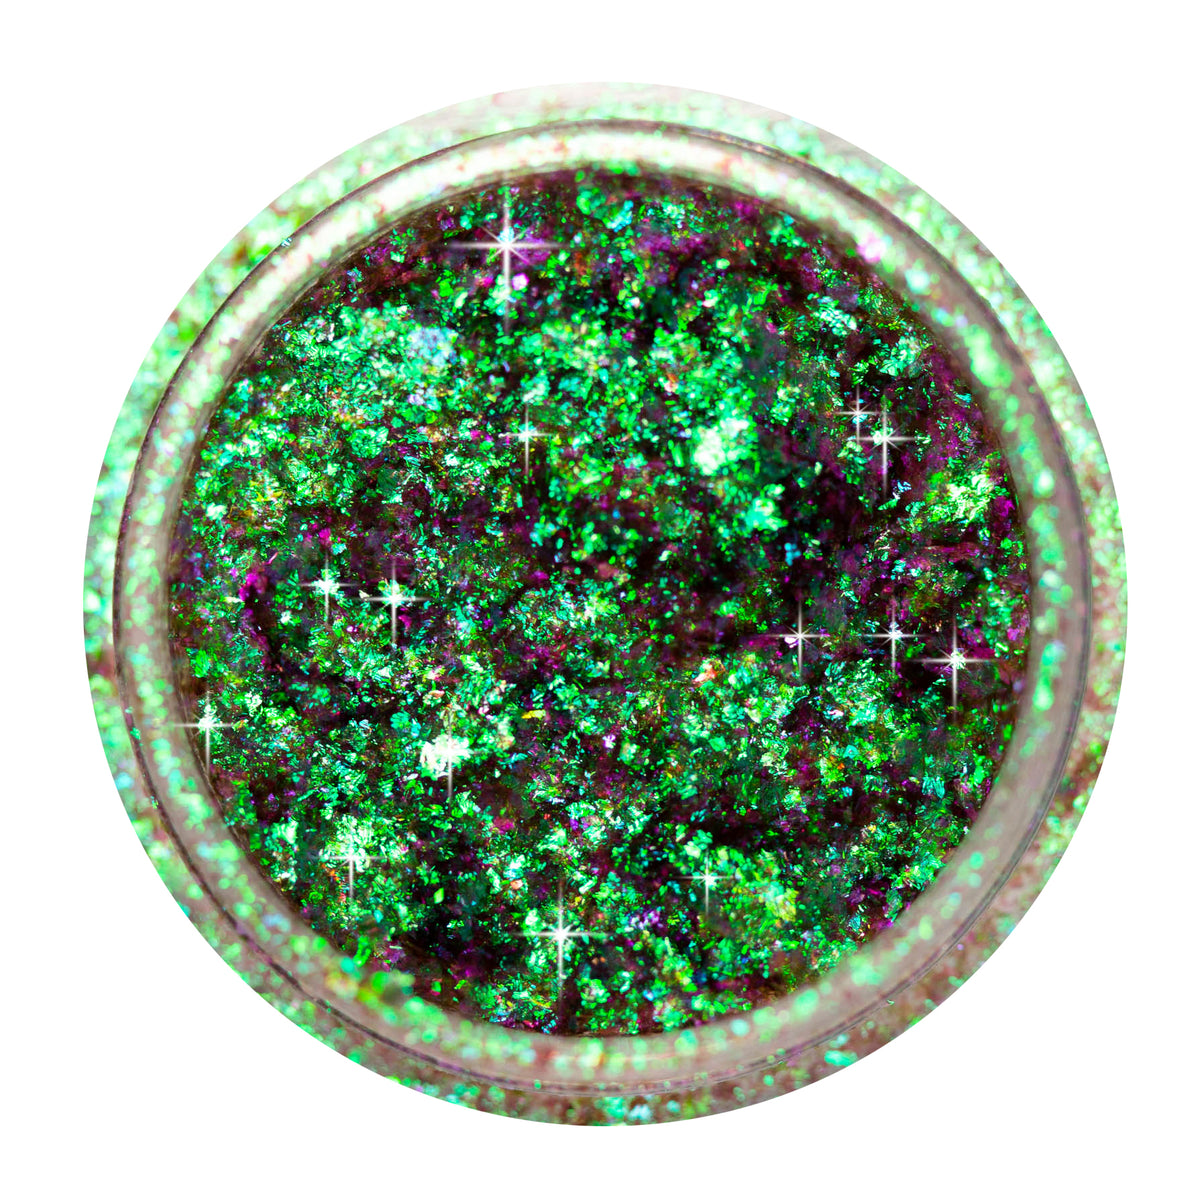 Magical Makeup Dragons Wings Multichrome Chameleon Pigment Flakes 0.5g